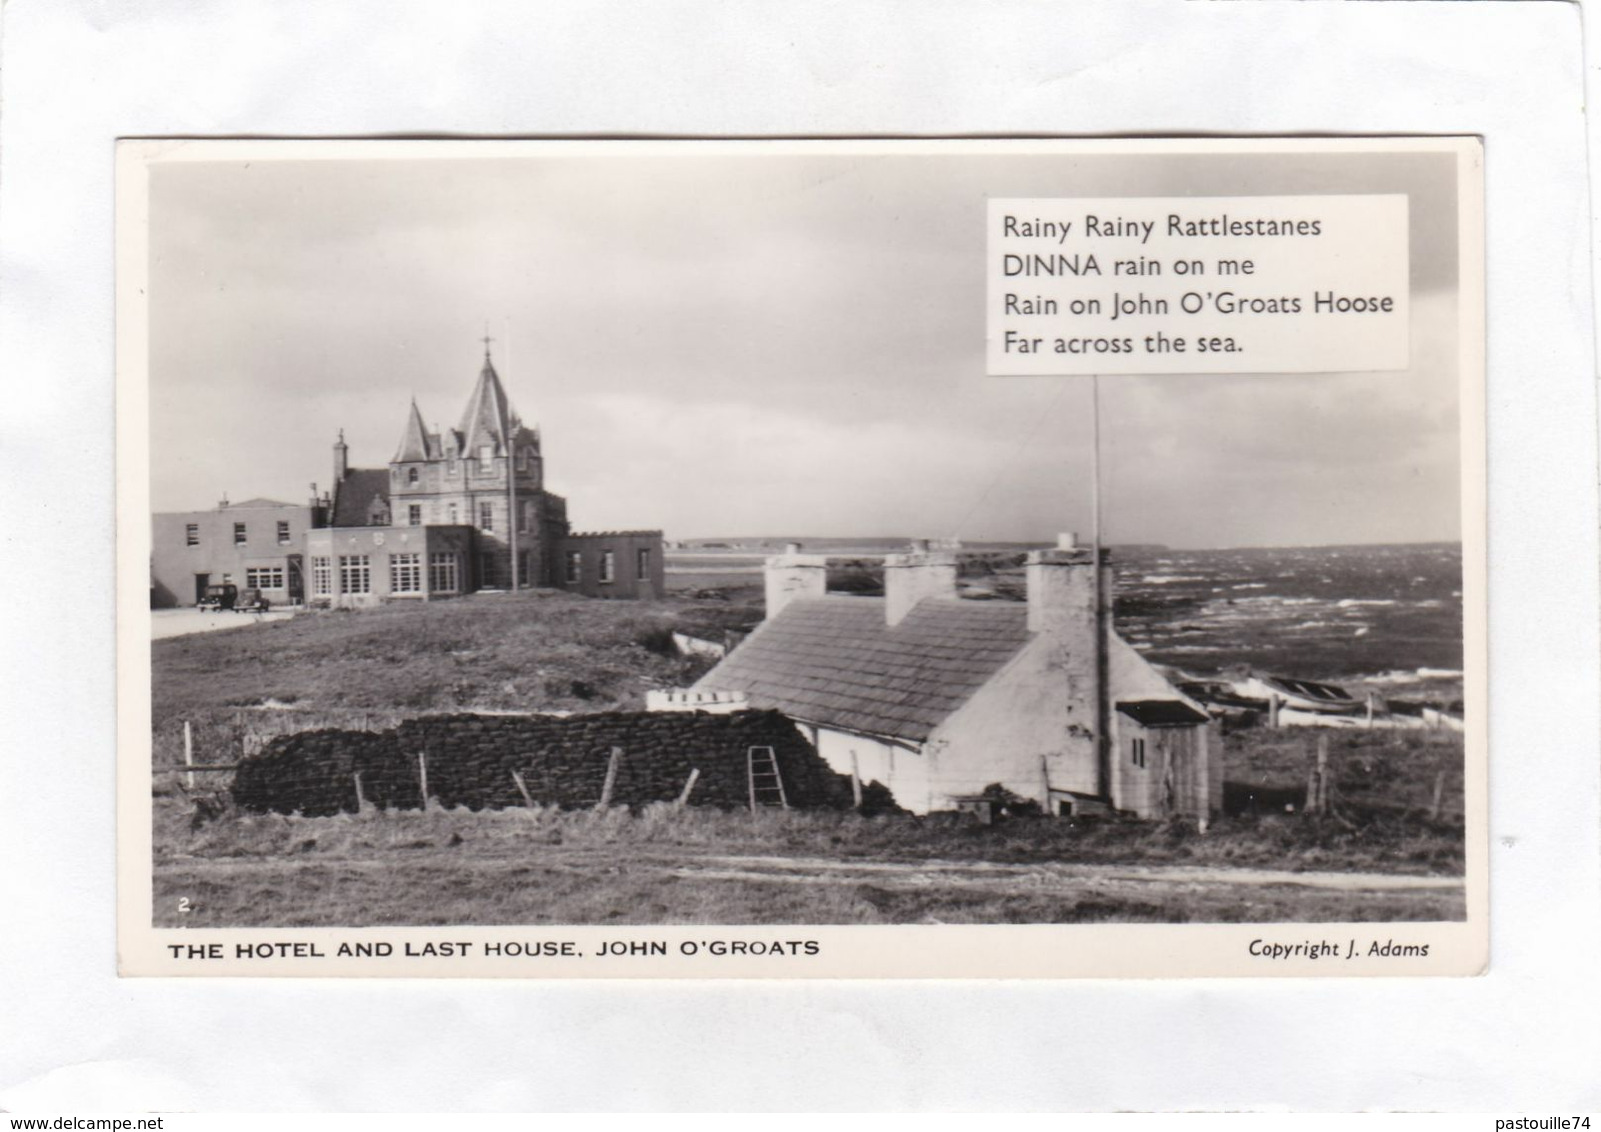 CPSM.  14 X 9  -  THE HOTEL AND LAST HOUSE, JOHN O'GROATS - Caithness